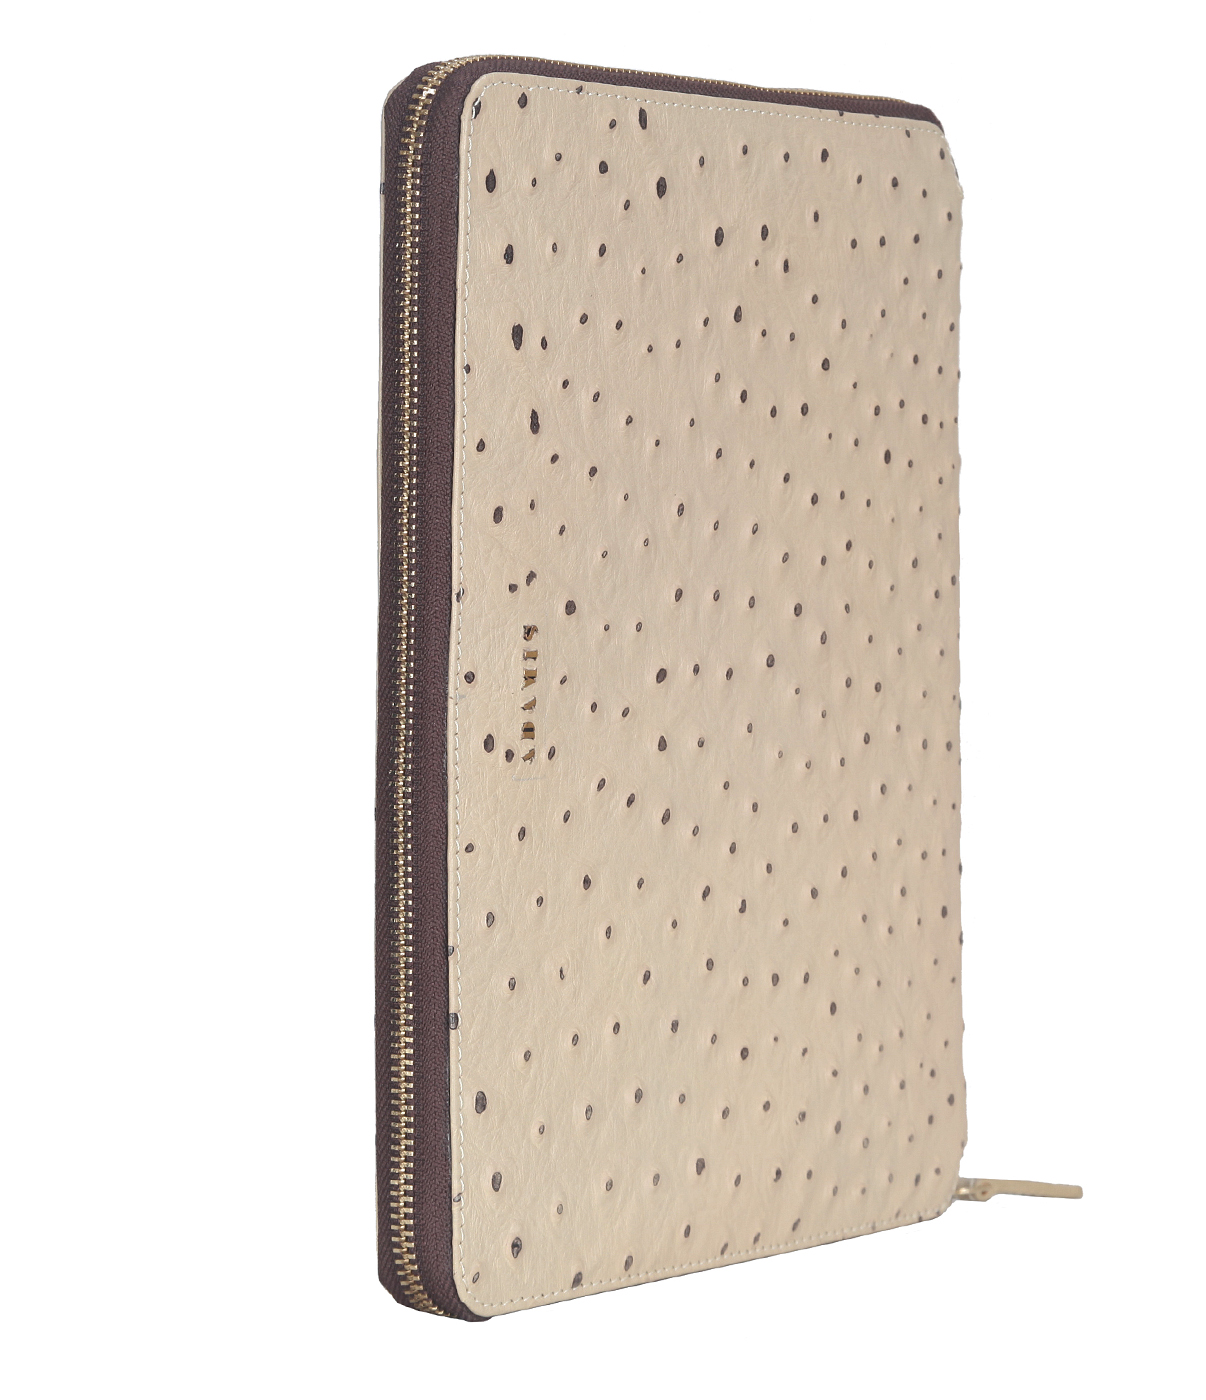 W279--Ipad air cover with magnetic tray in Genuine Leather - Beige